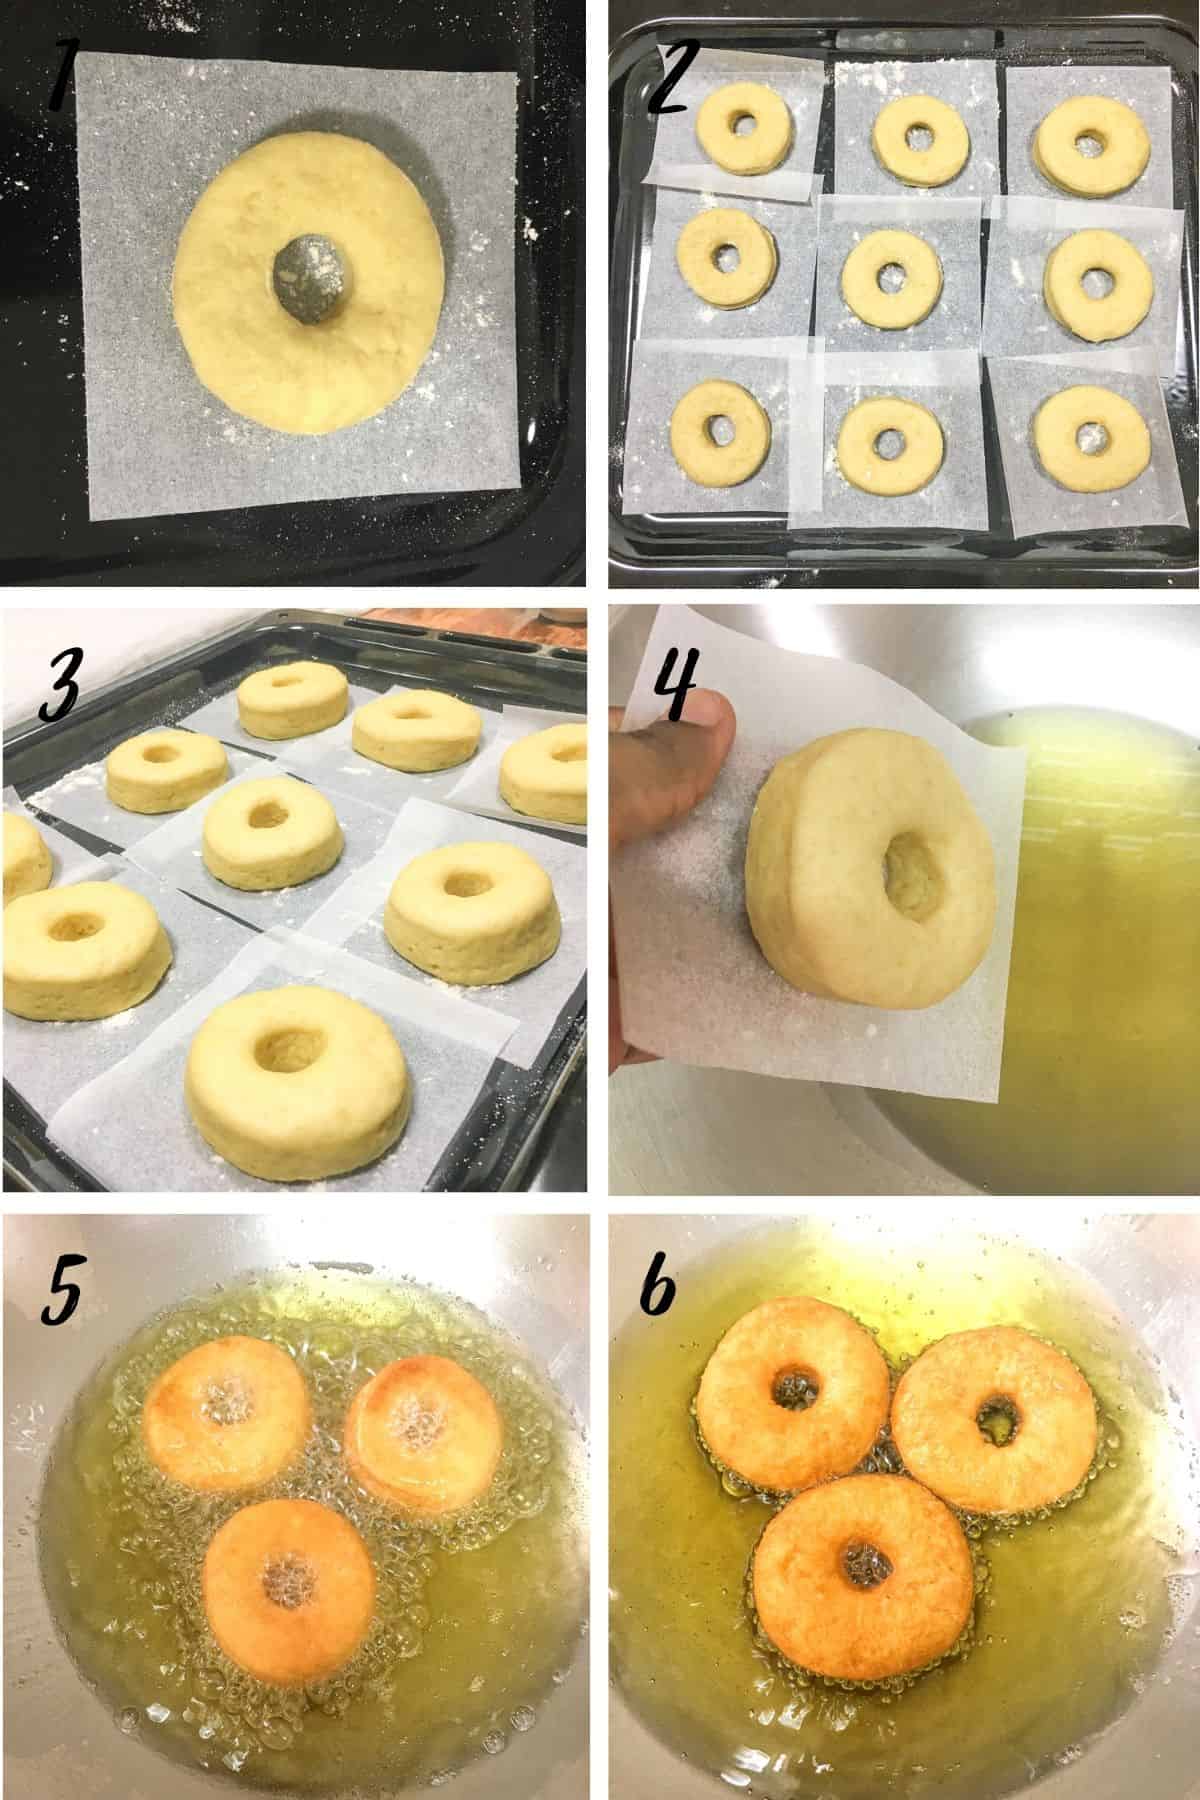 A poster of 6 images show how to fry ring doughnuts.